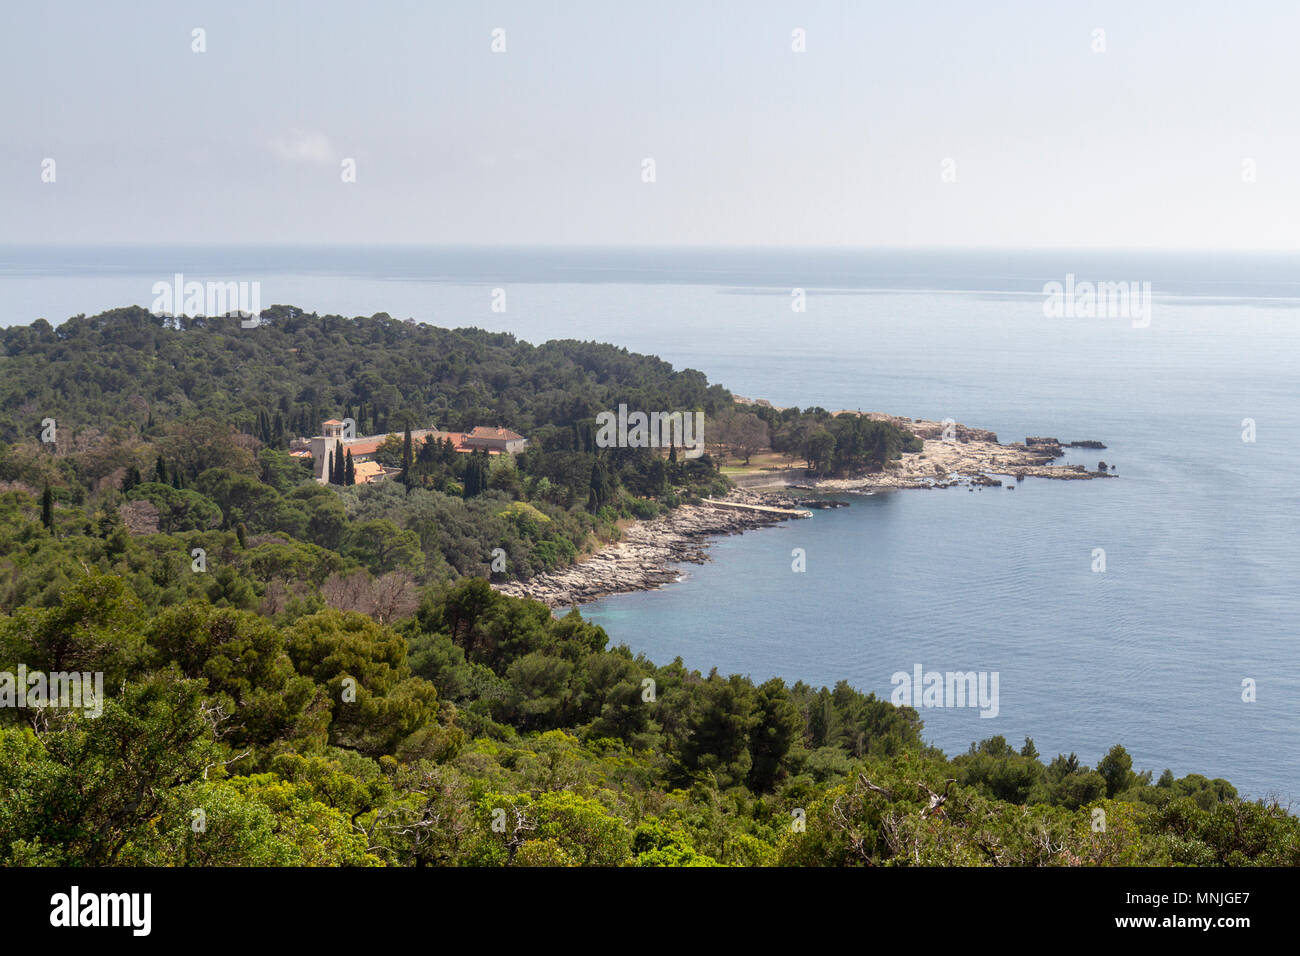 View from Fort Royal over the southern part of Lokrum Island, in the Adriatic Sea off Dubrovnik, Croatia. Stock Photo